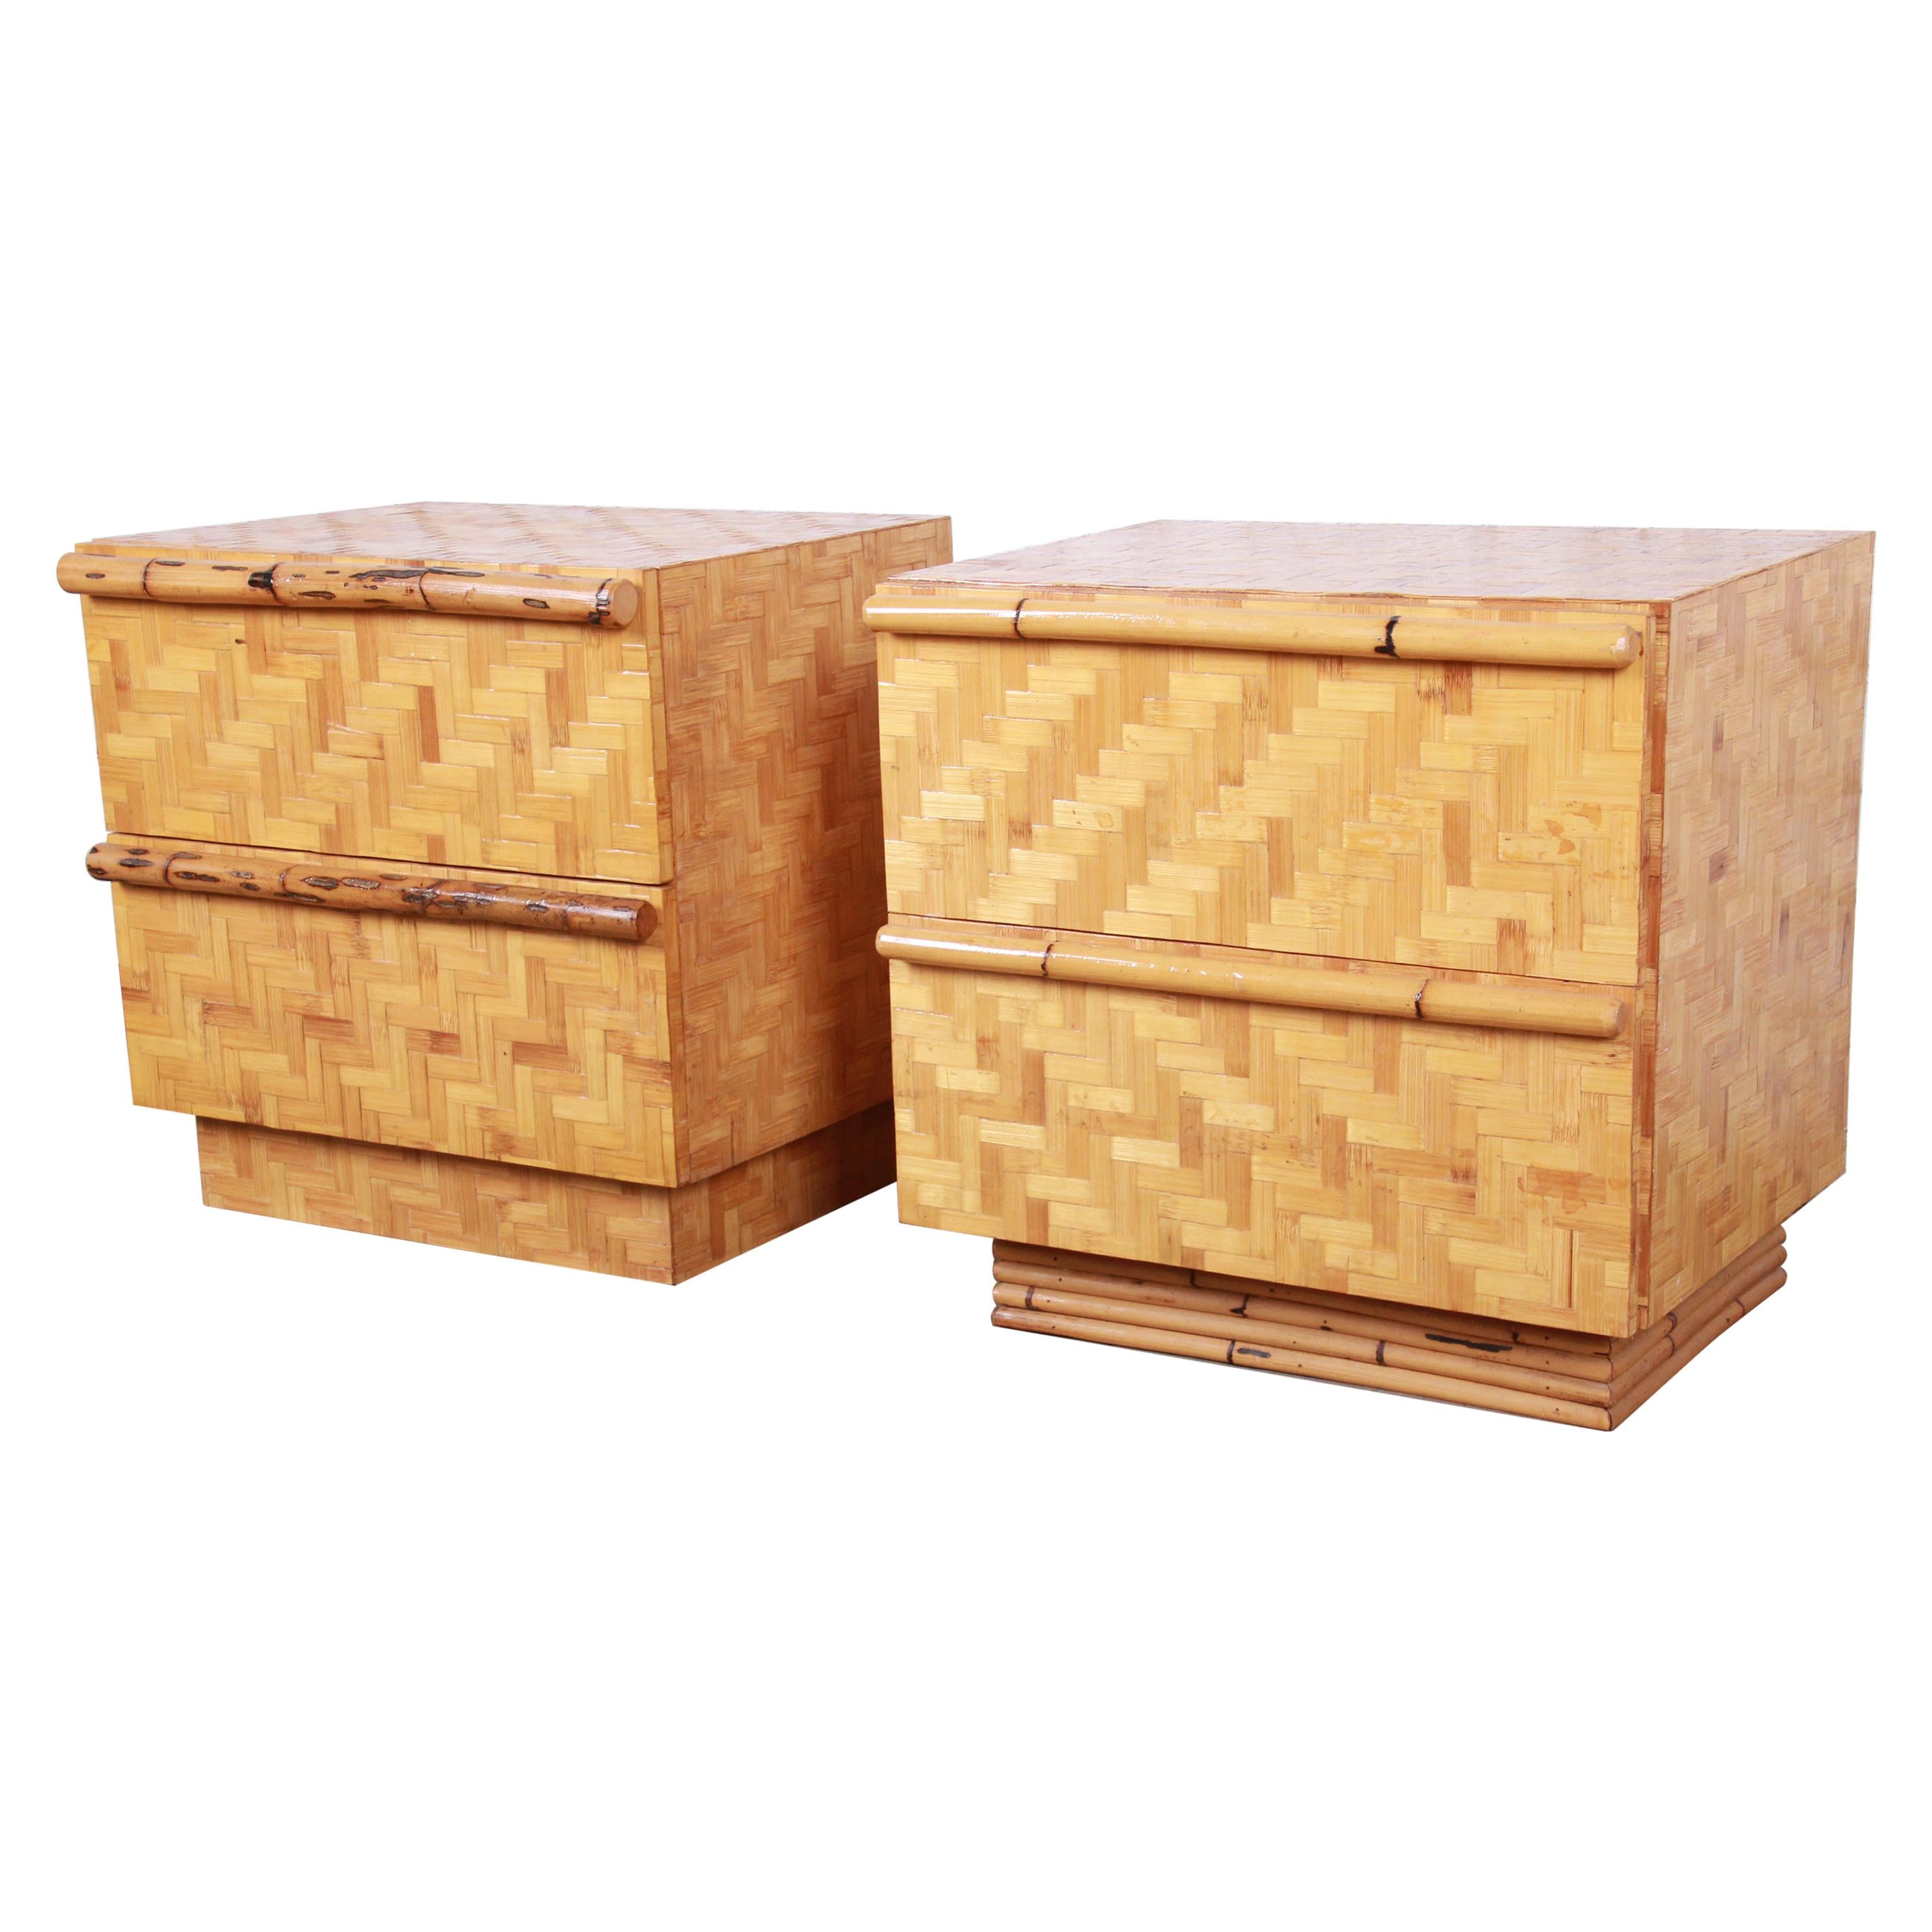 Midcentury Hollywood Regency Chinoiserie Bamboo Parquetry Nightstands, Pair